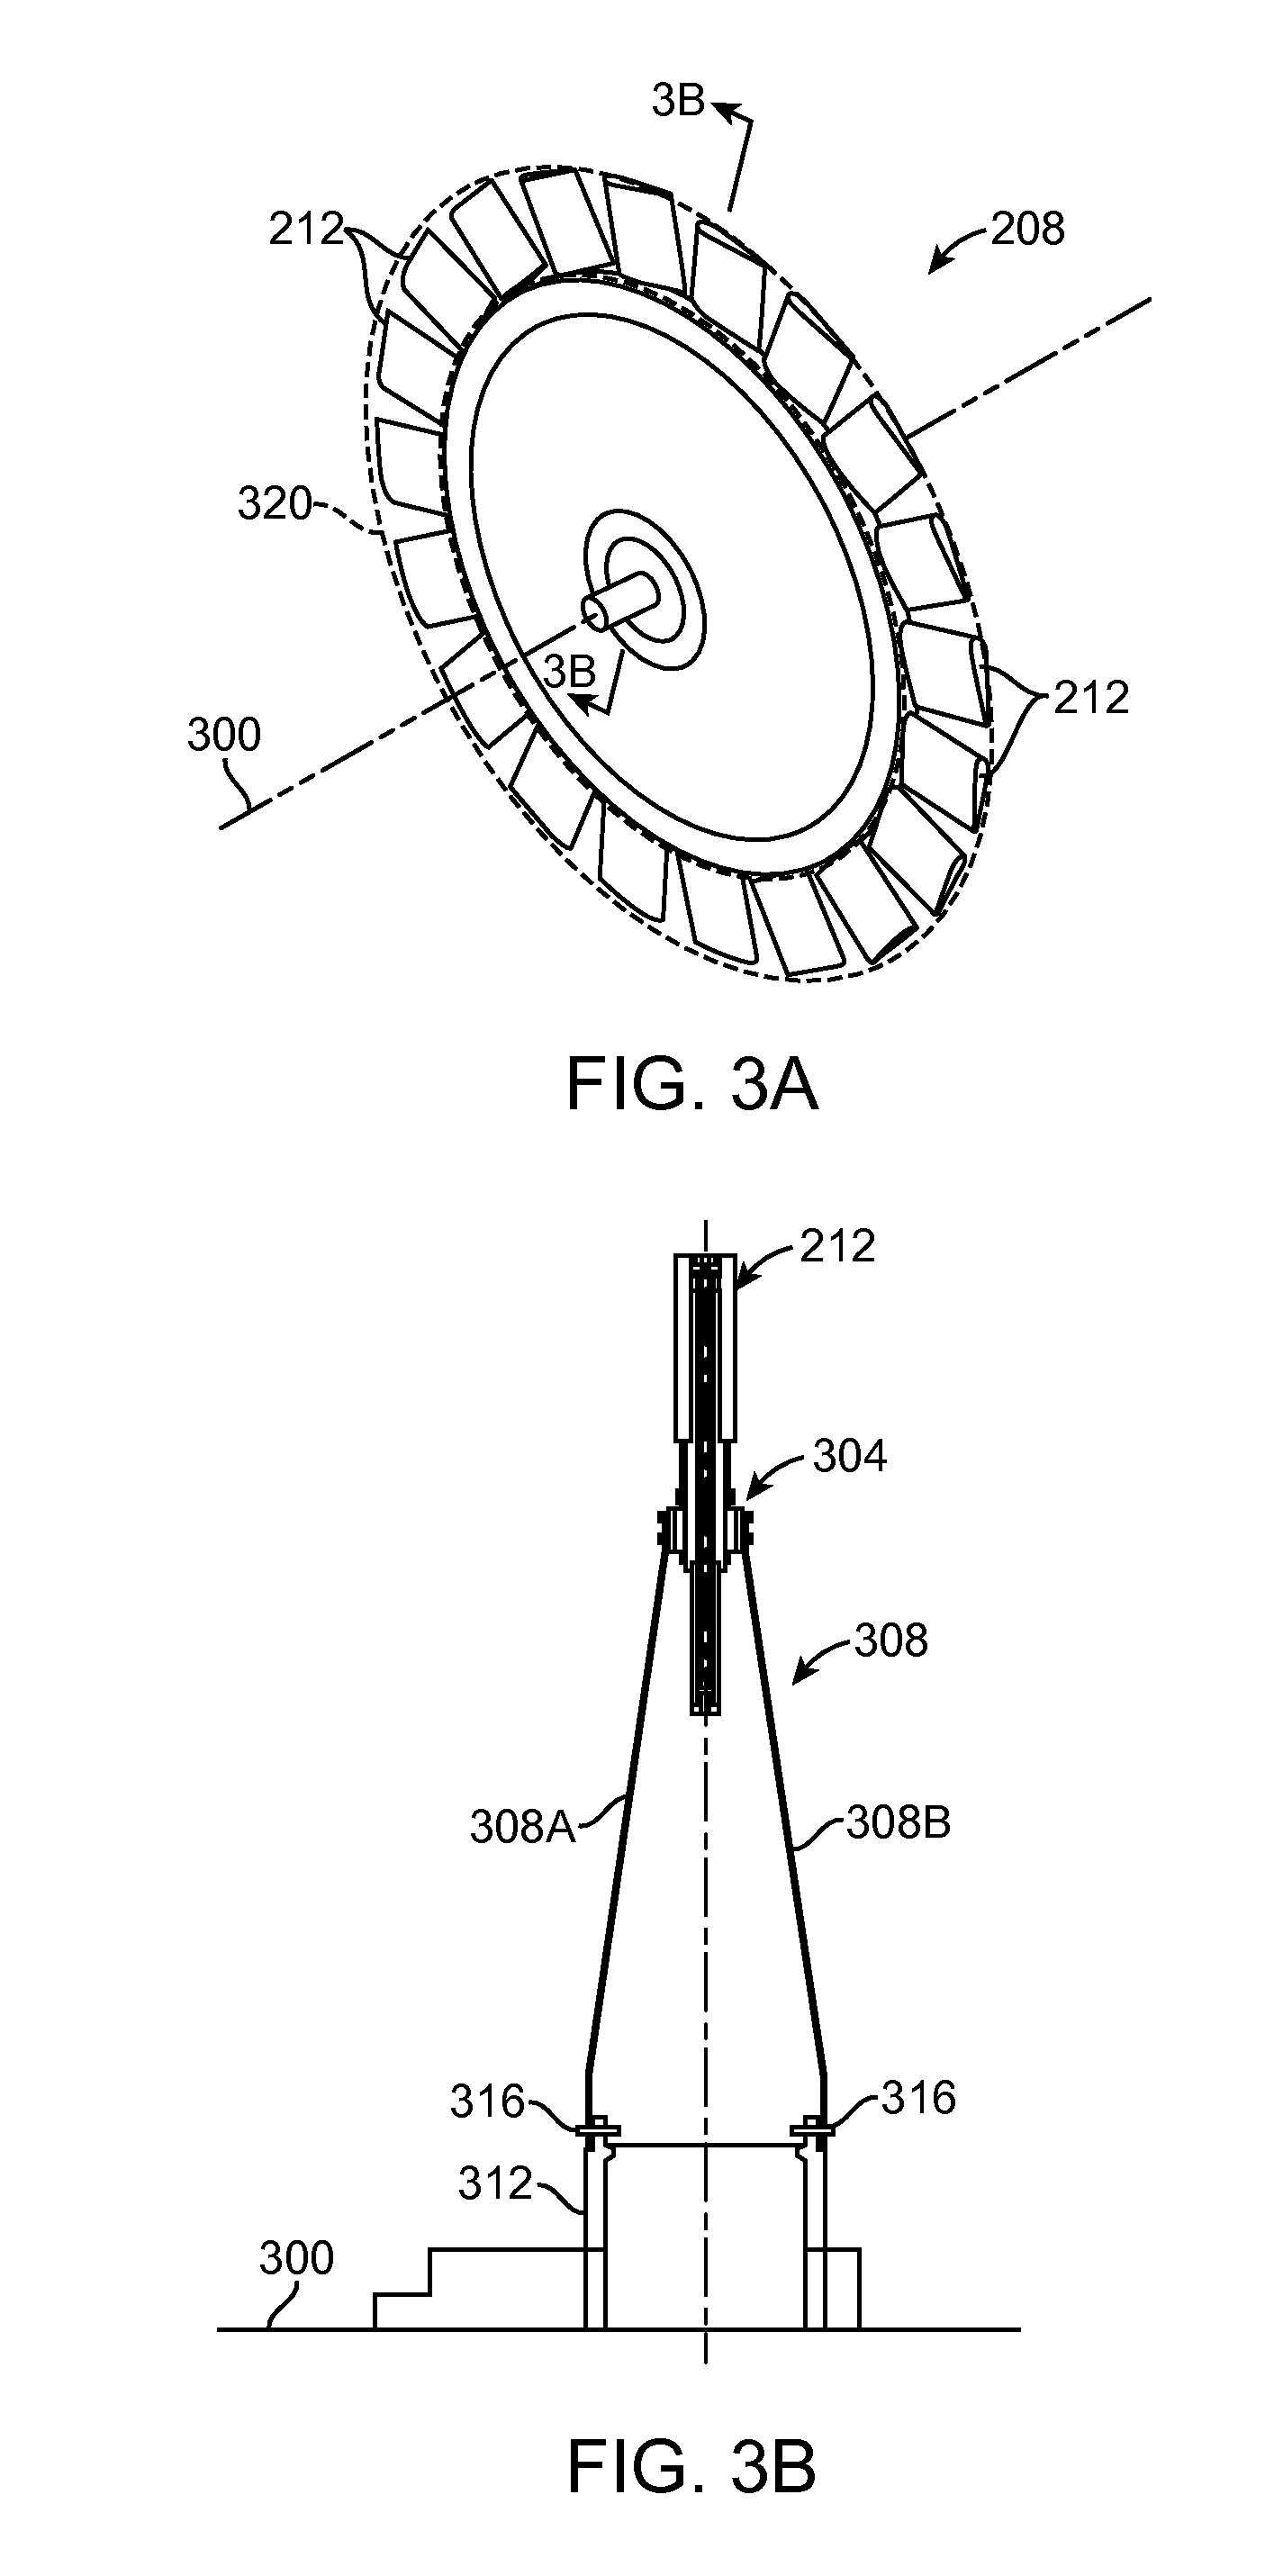 Turbomachinery having self-articulating blades, shutter valve, partial-admission shutters, and/or variable pitch inlet nozzles